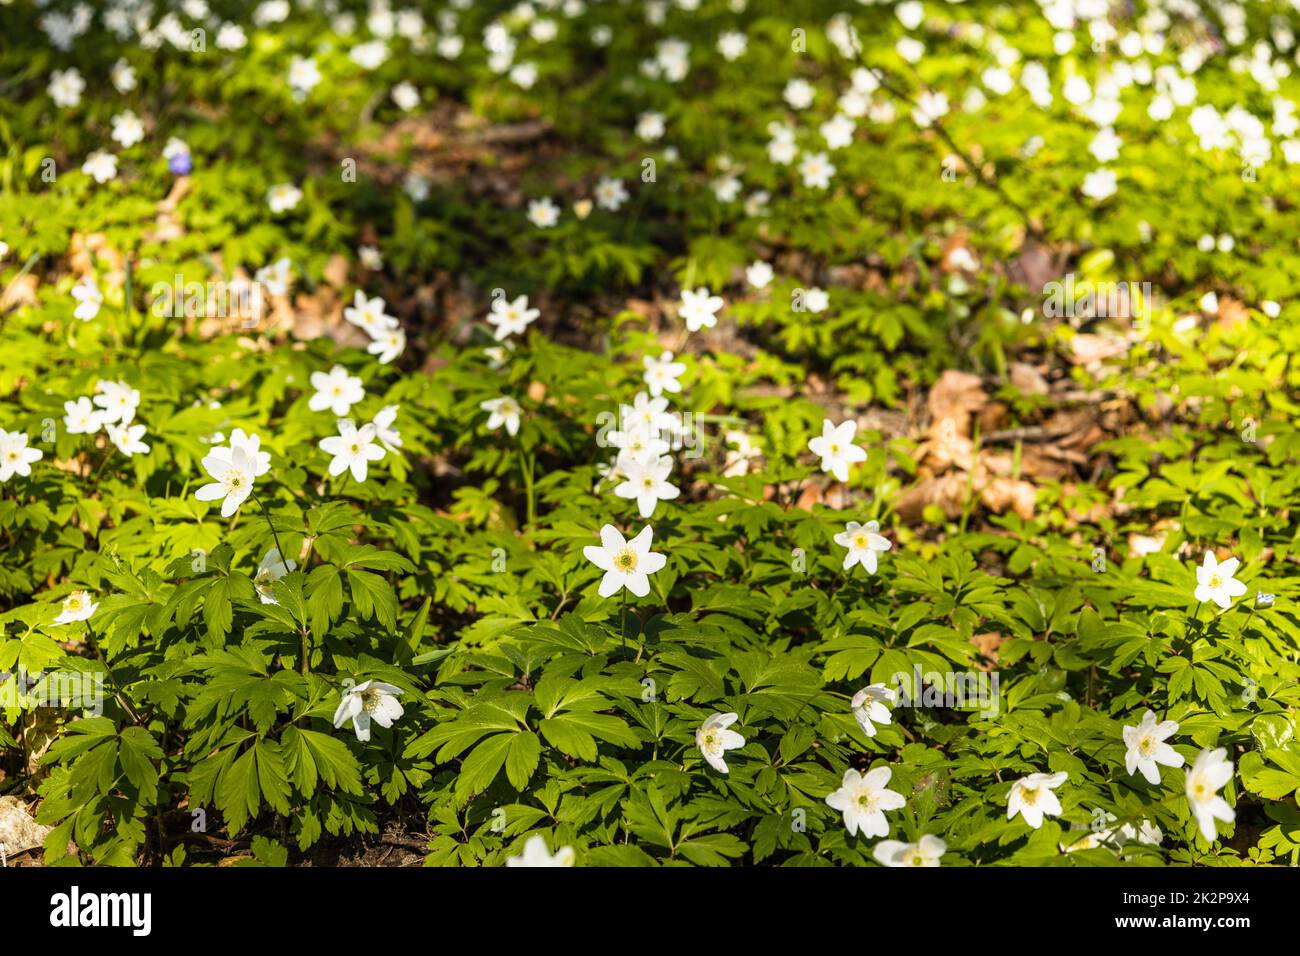 First spring flower, white wildflower or Hepatica Nobilis blooming in early spring Stock Photo